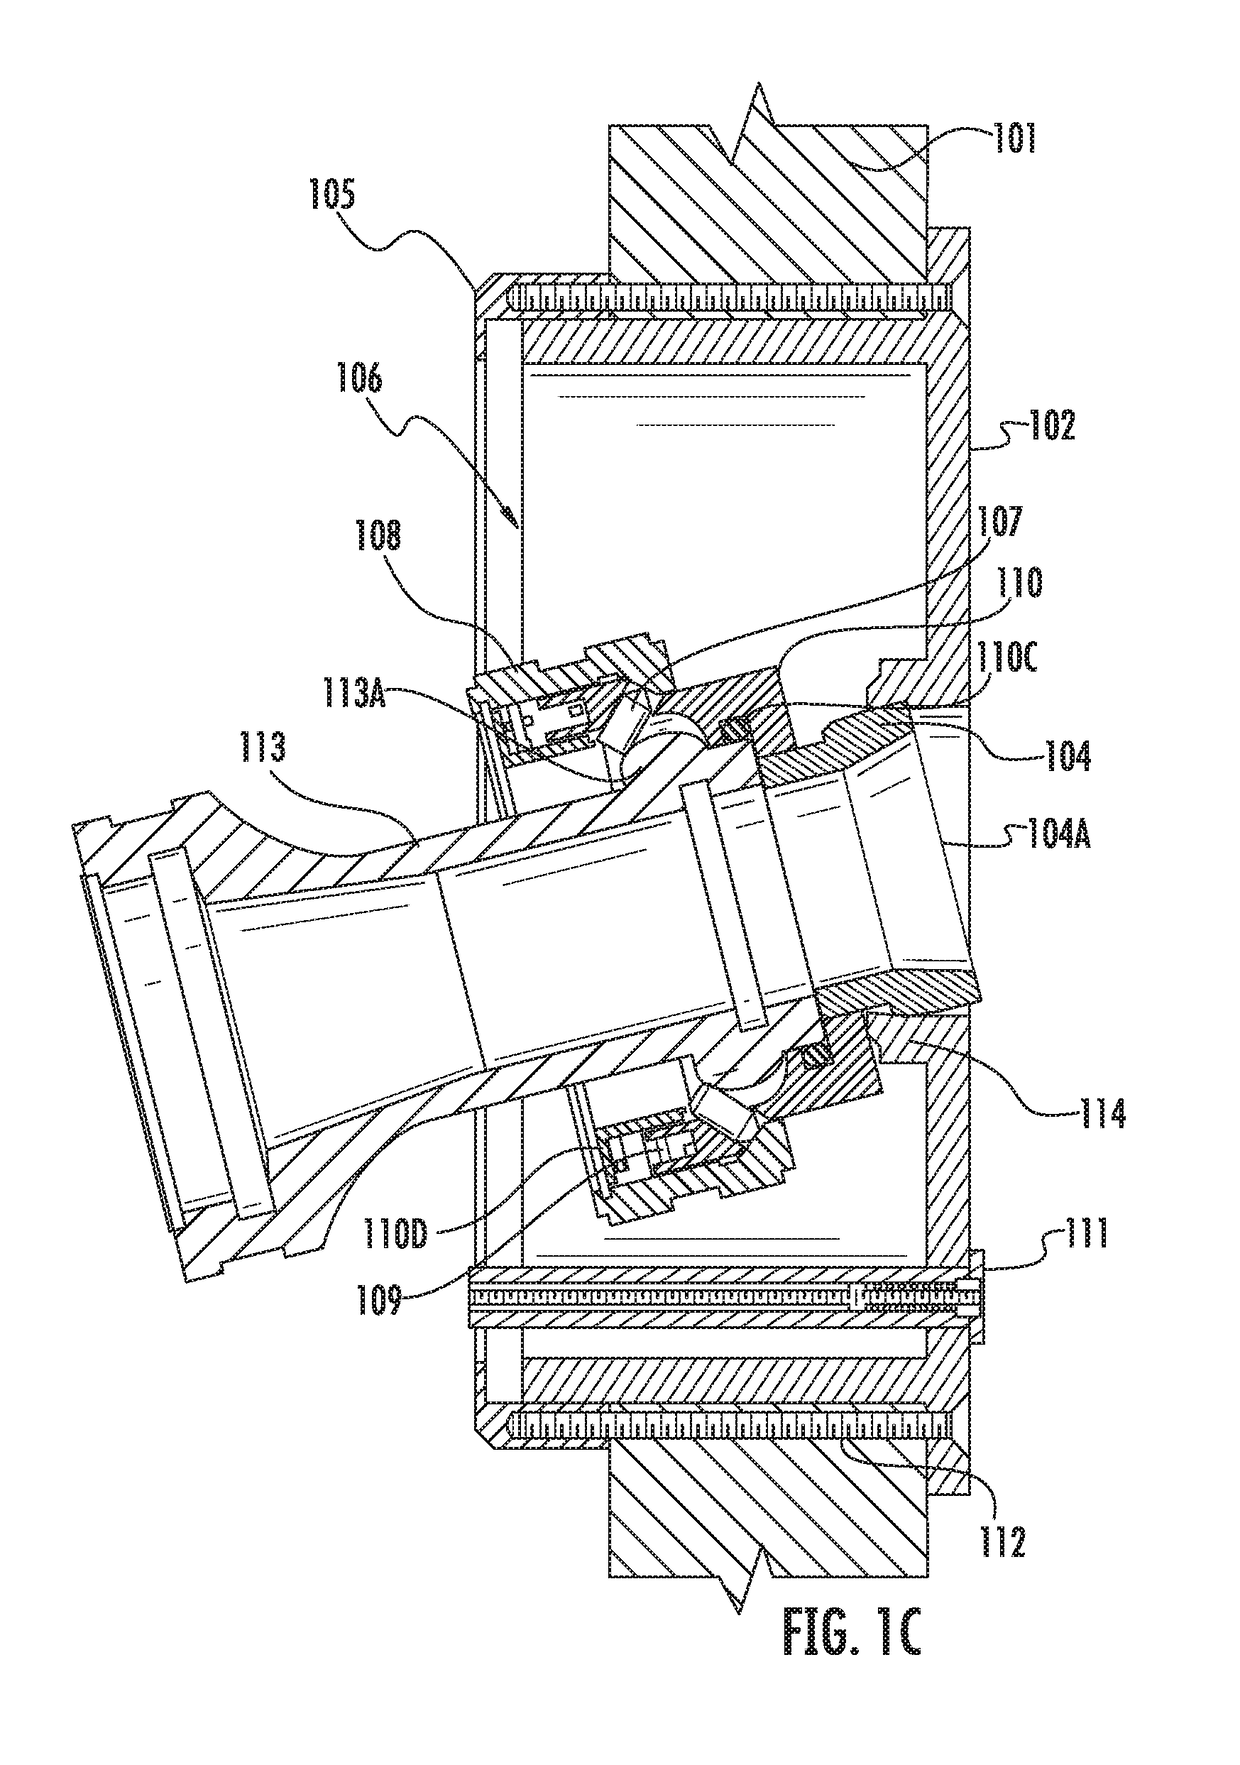 Structurally-installed access device for accepting connection by a fire hose nozzle to introduce firefighting fluid into an enclosed space of a structure